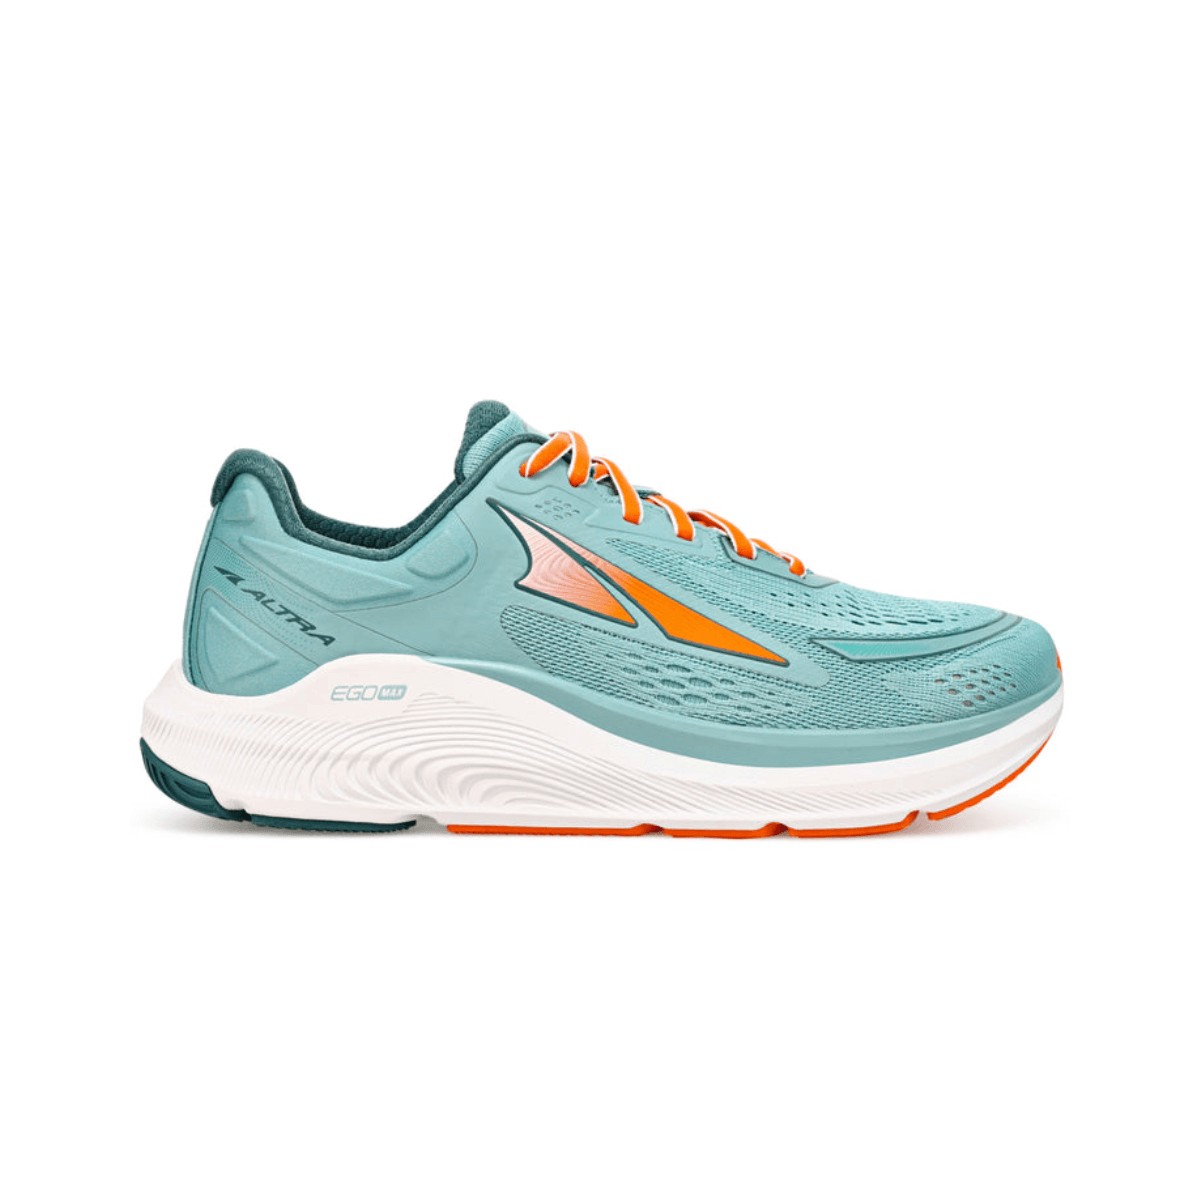 Altra Paradigma 6 Turquoise Orange Chaussures pour femmes AW22, Taille 38 - EUR